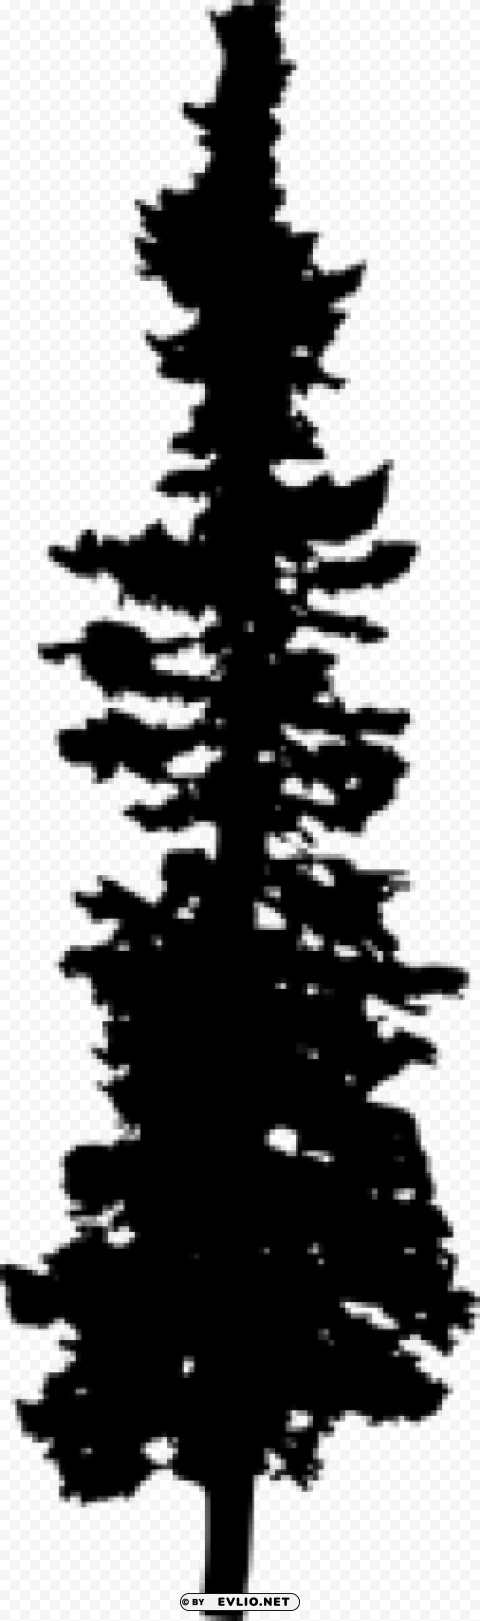 Pine Tree Silhouette PNG with no background diverse variety